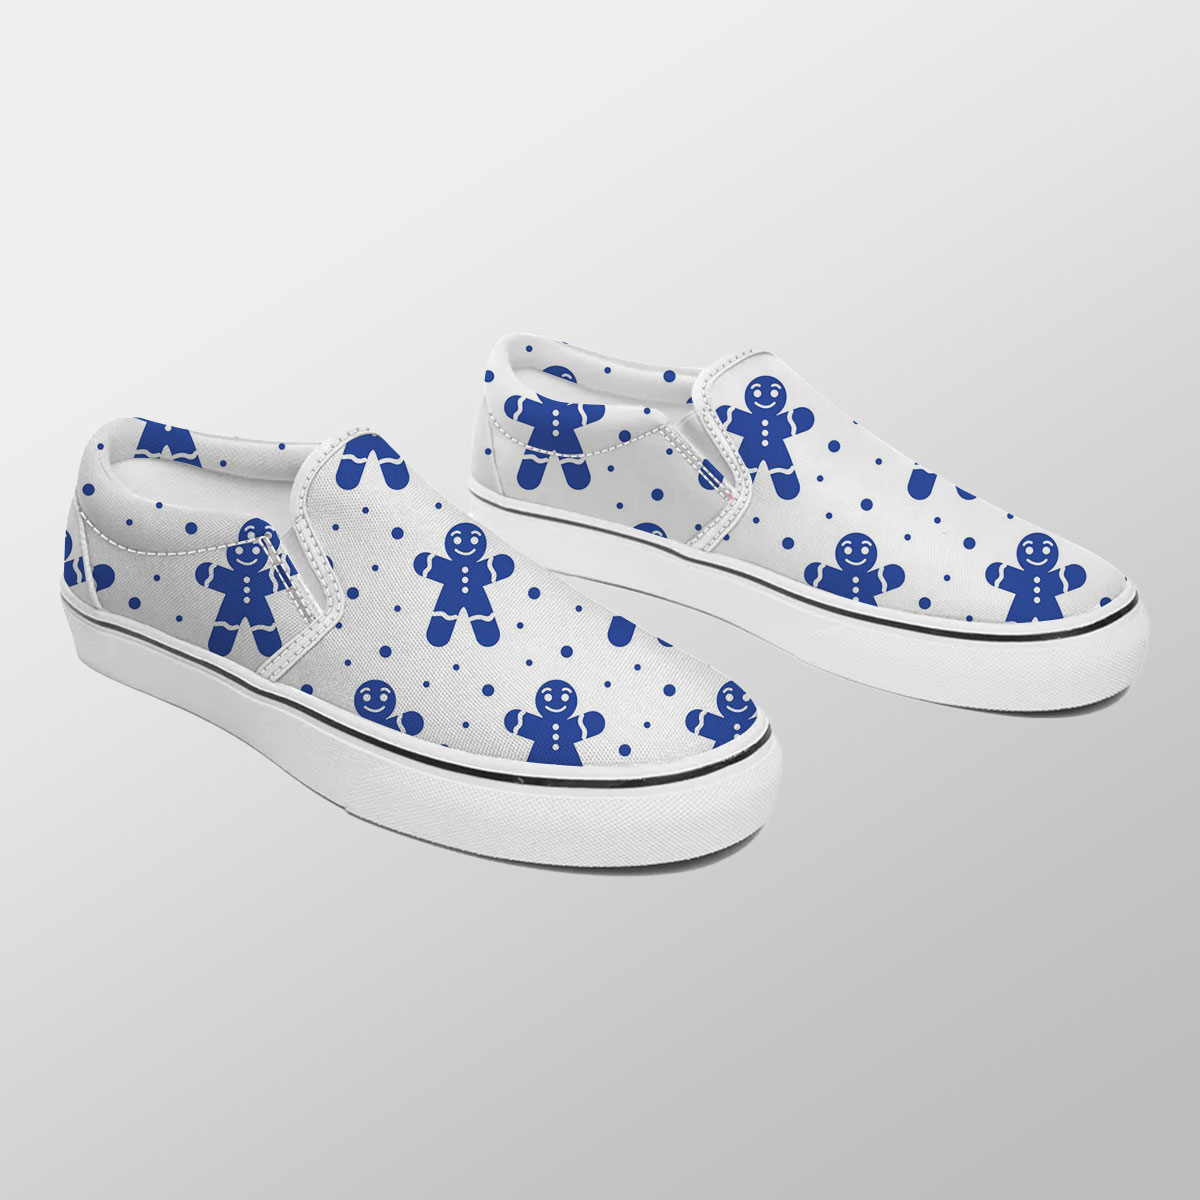 Christmas Gingerbread Man On The Light Background Slip On Sneakers